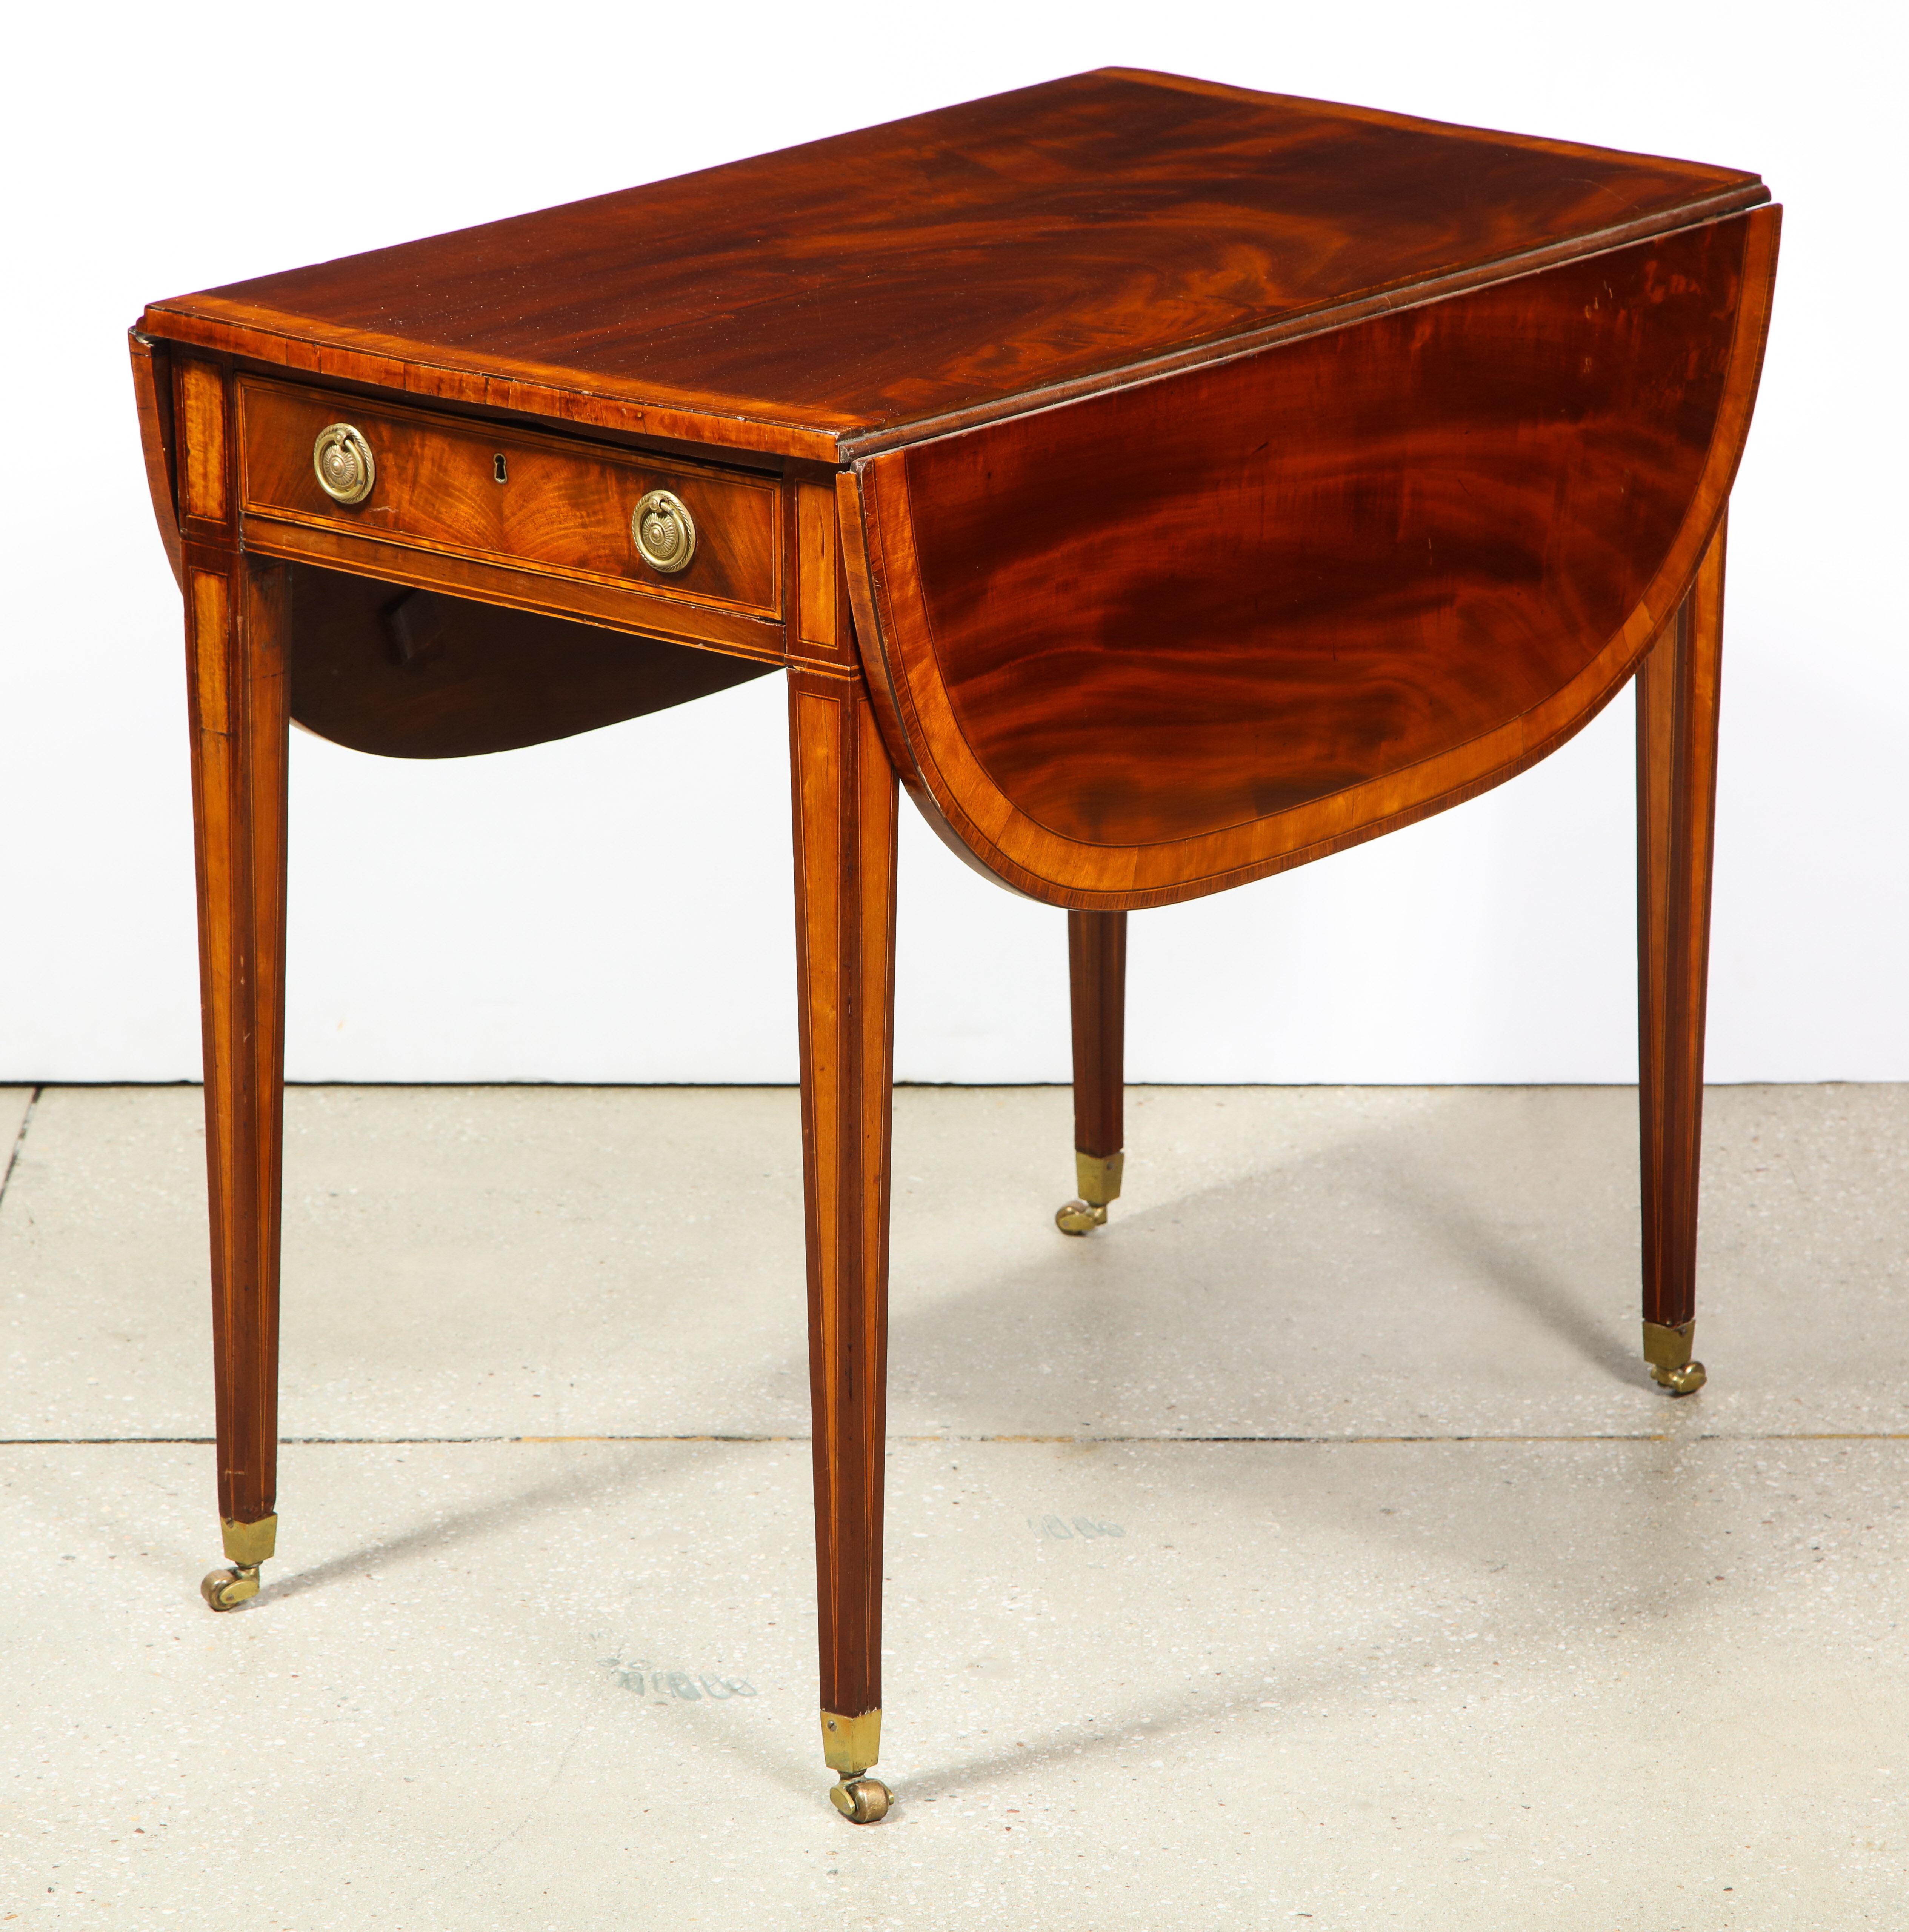 The inlaid mahogany table, with a mahogany top cross banded in satinwood, two 11